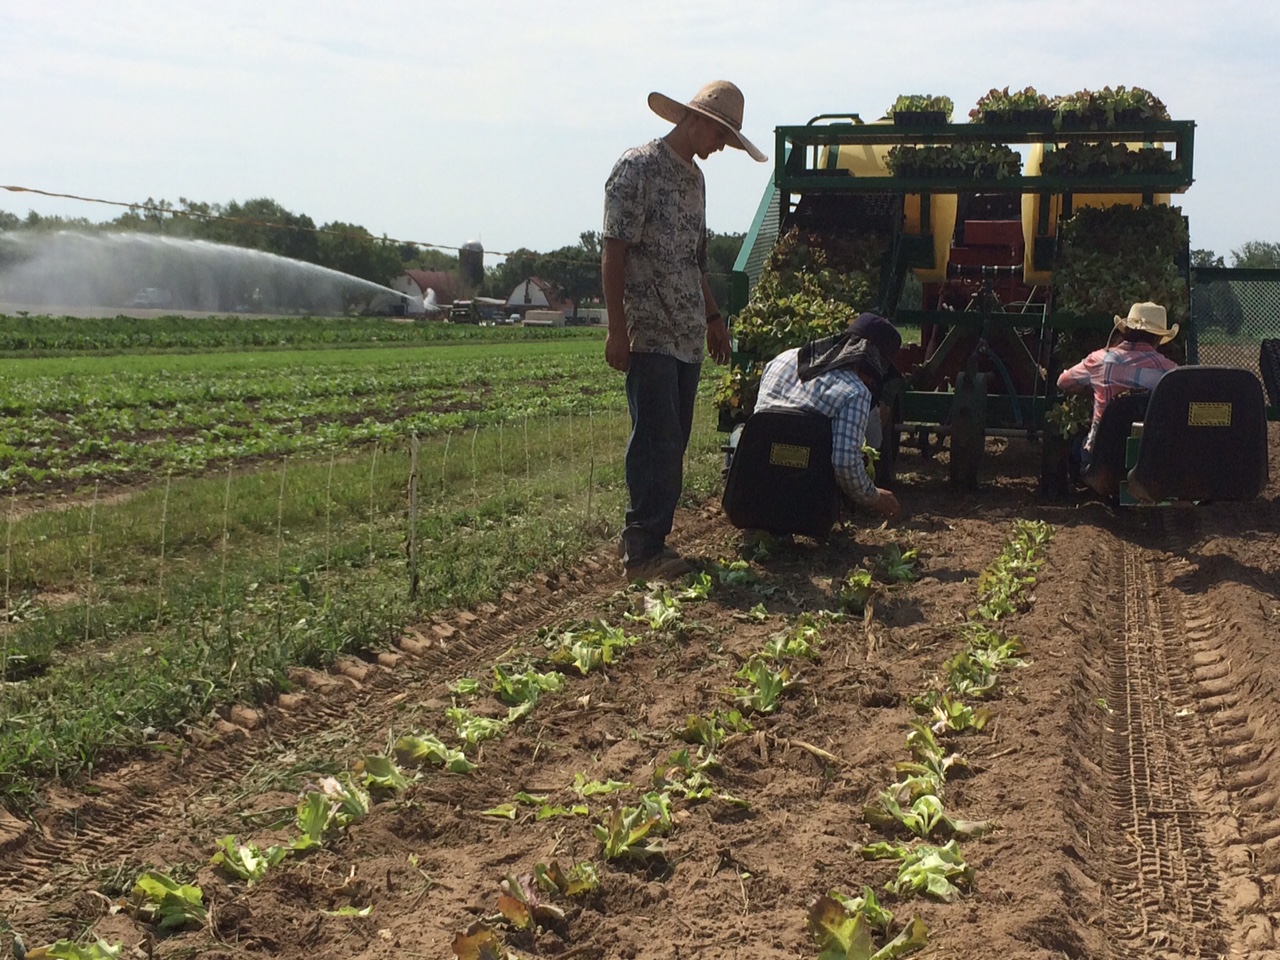 Victor monitors the transplanting of fall lettuce as we irrigate baby greens in the background. An account of everything that happened on the farm on this particular day would fill more than a newsletter column. Remember our tag line: Your Very Own Farm, Without all the Work!